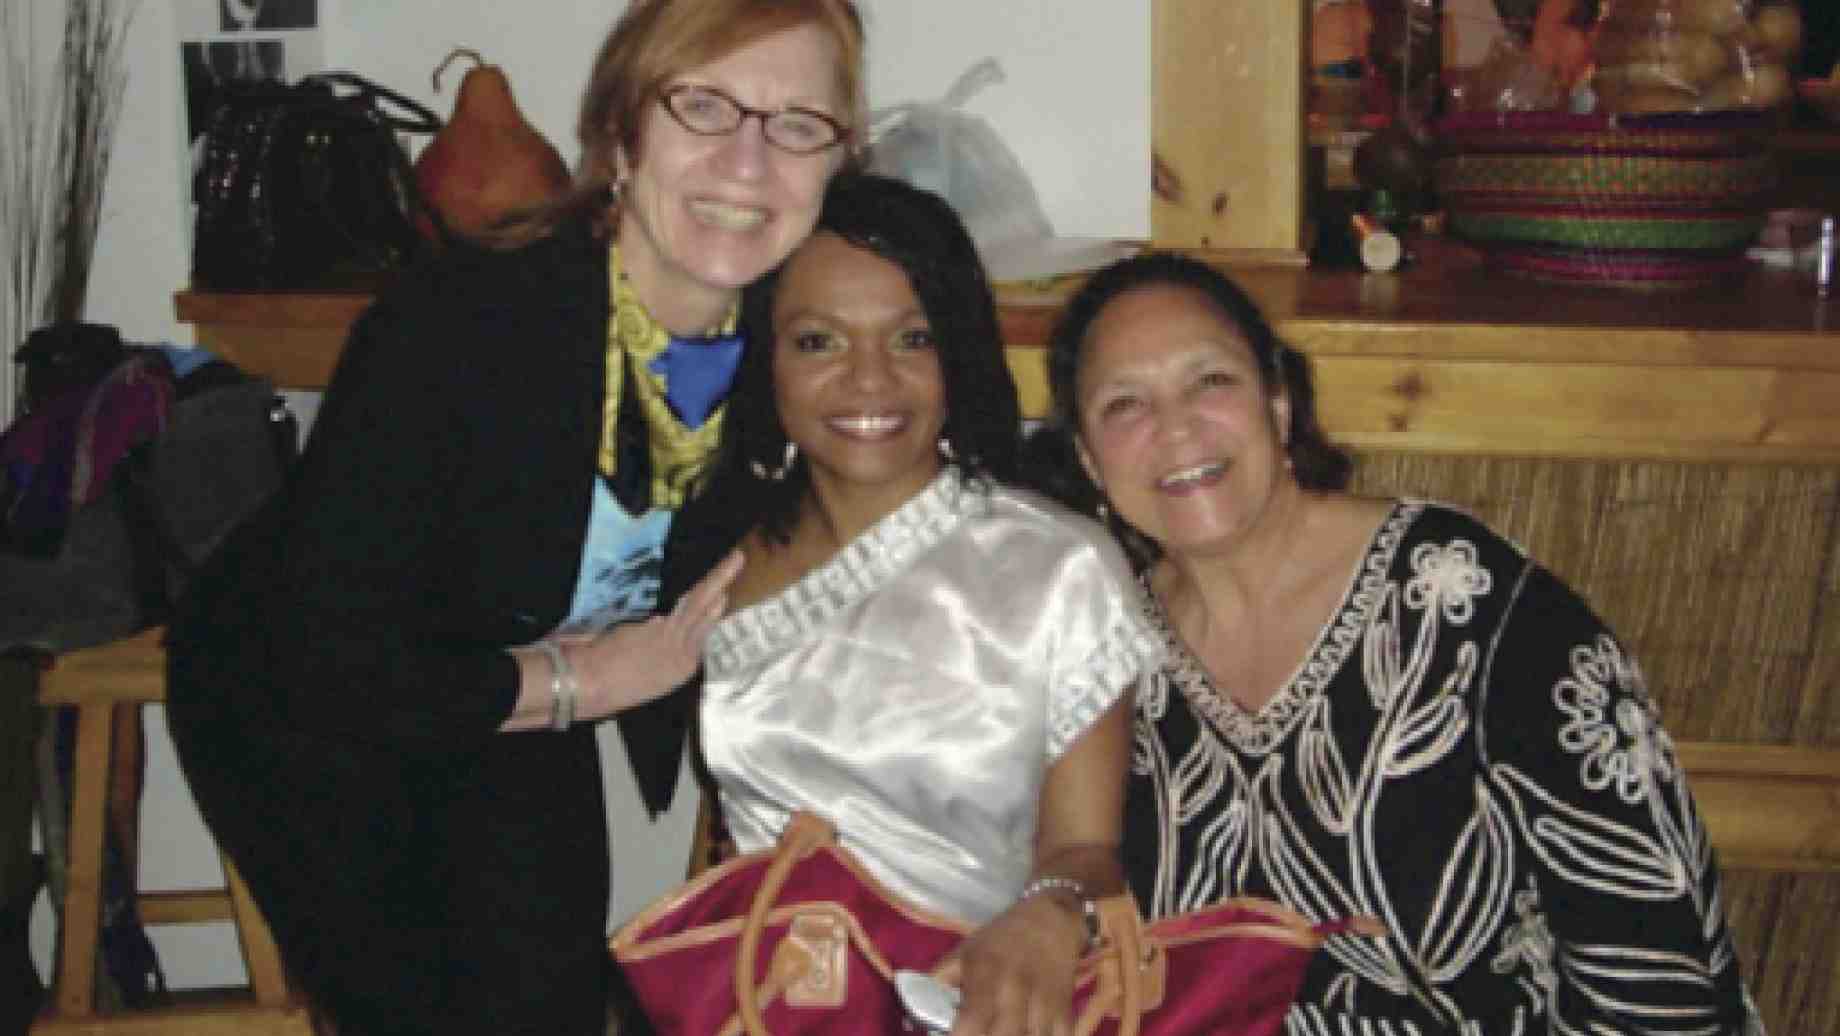 (From left to right) Joan Frosch, Janete Silva, and Yvonne Daniel featured at the "African Dance in the Diaspora" Conference in January 2012.